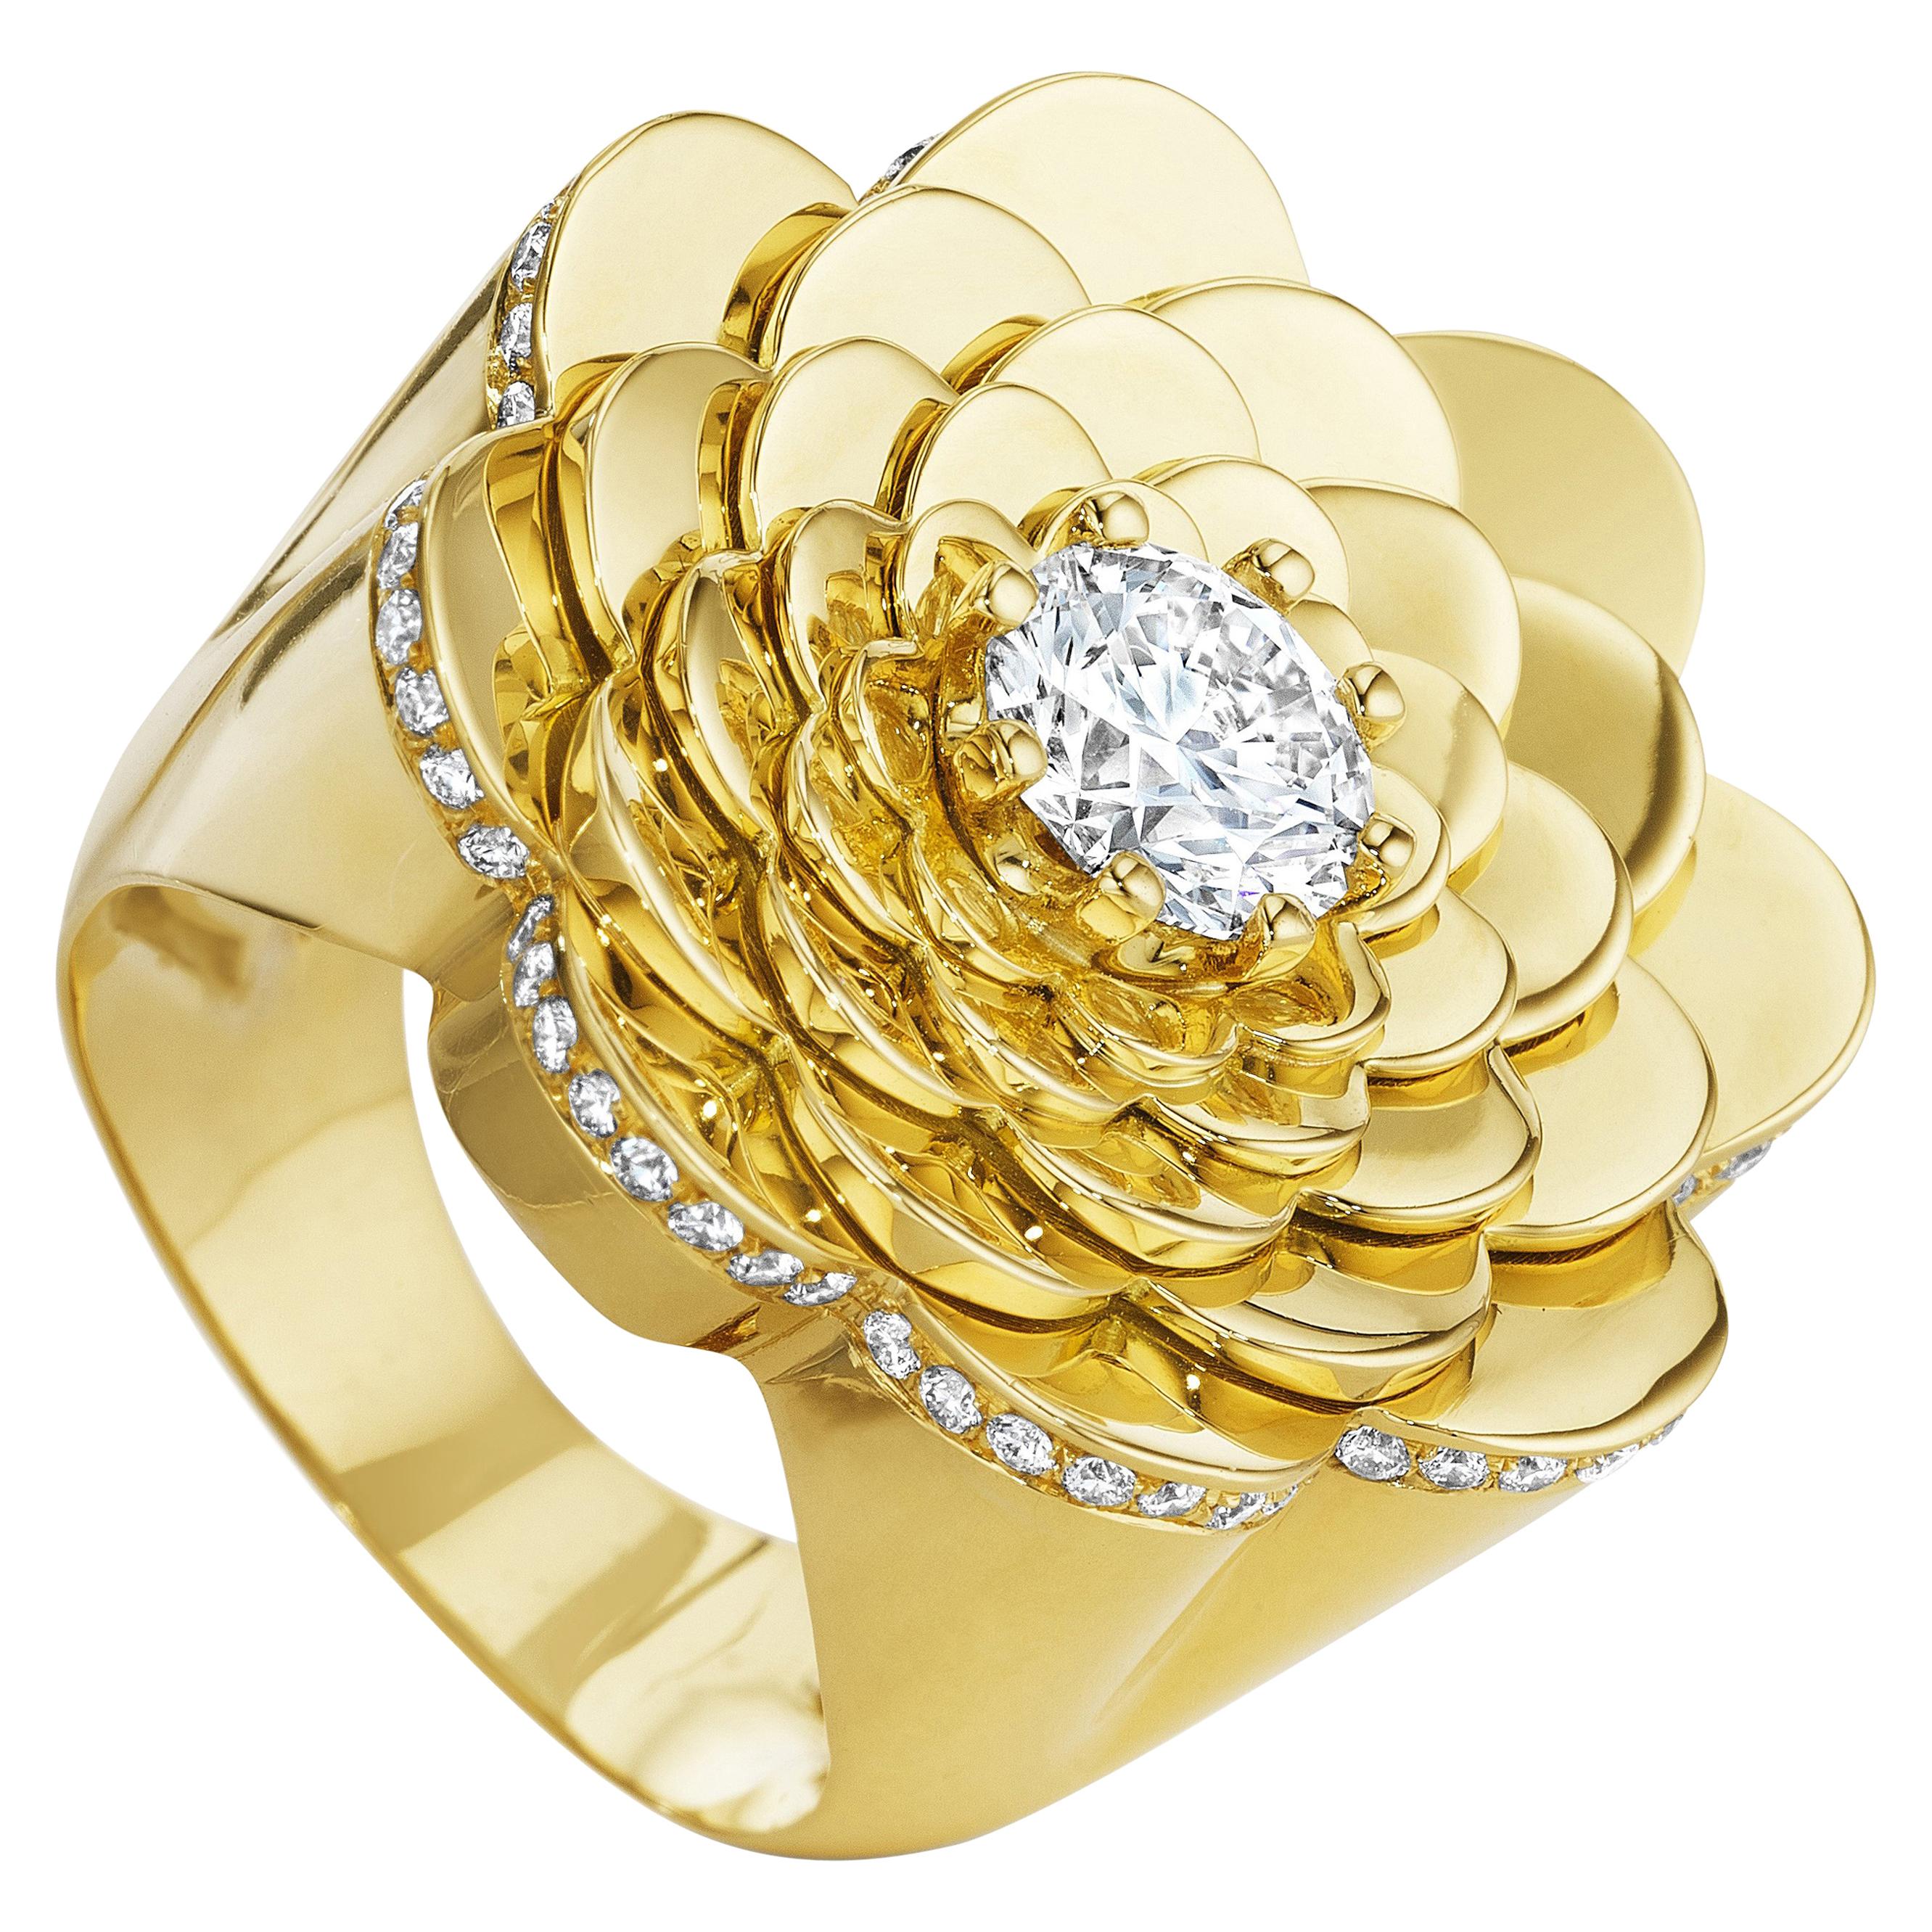 CADAR Trio Cocktail Ring, 18K Yellow Gold and 1.75cttw White Diamond